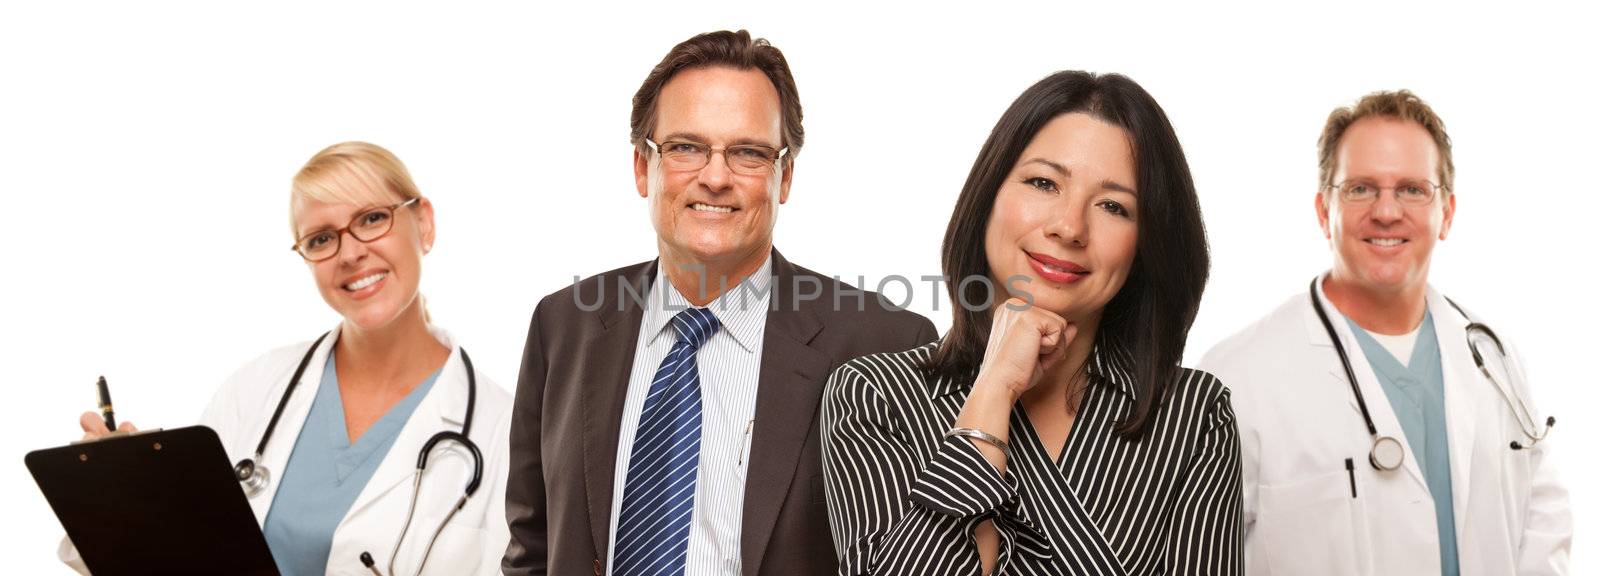 Hispanic Woman with Husband and Male Doctors or Nurses by Feverpitched